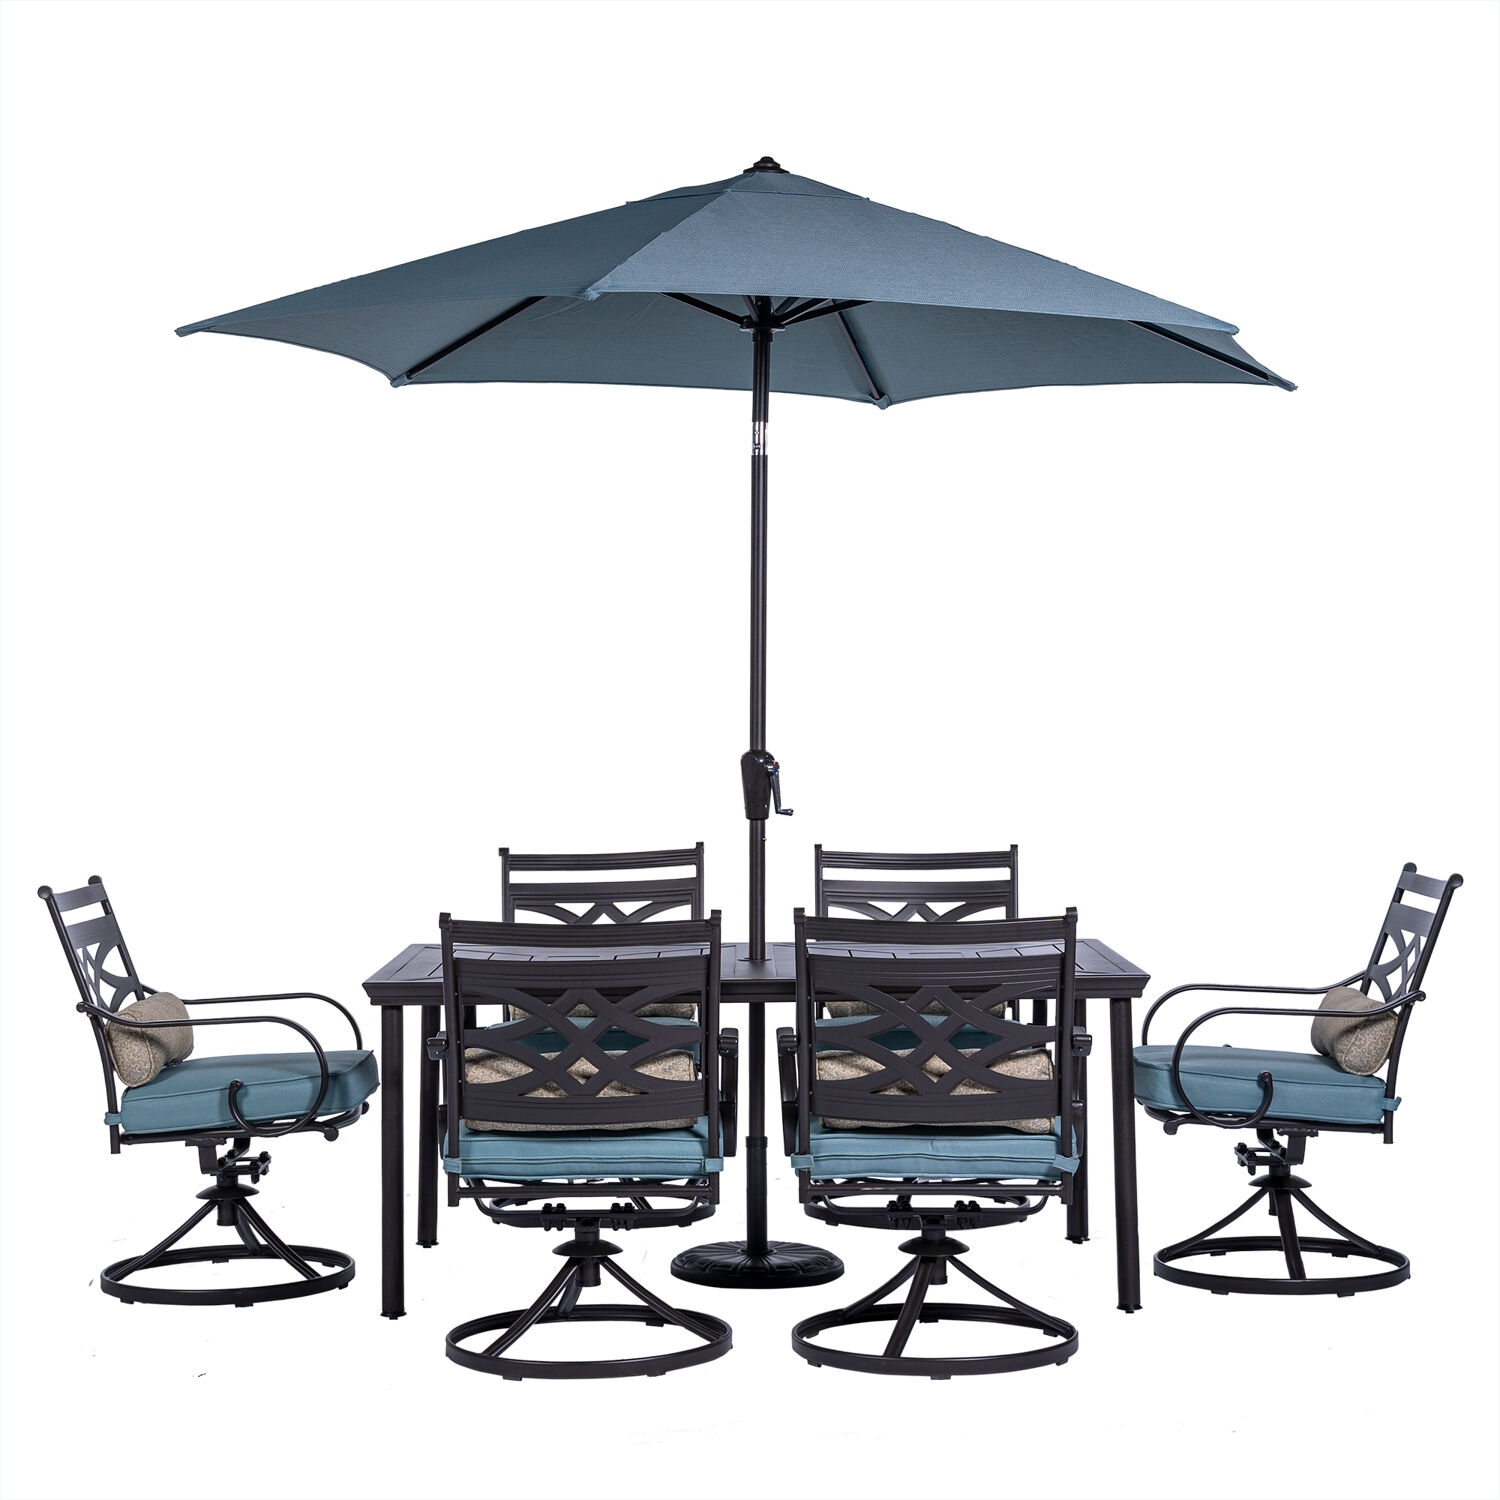 Hanover Montclair 7-piece Dining Set In Ocean Blue With 6 Swivel Rockers  40-in. X 66-in. Dining Table And 9-ft. Umbrella